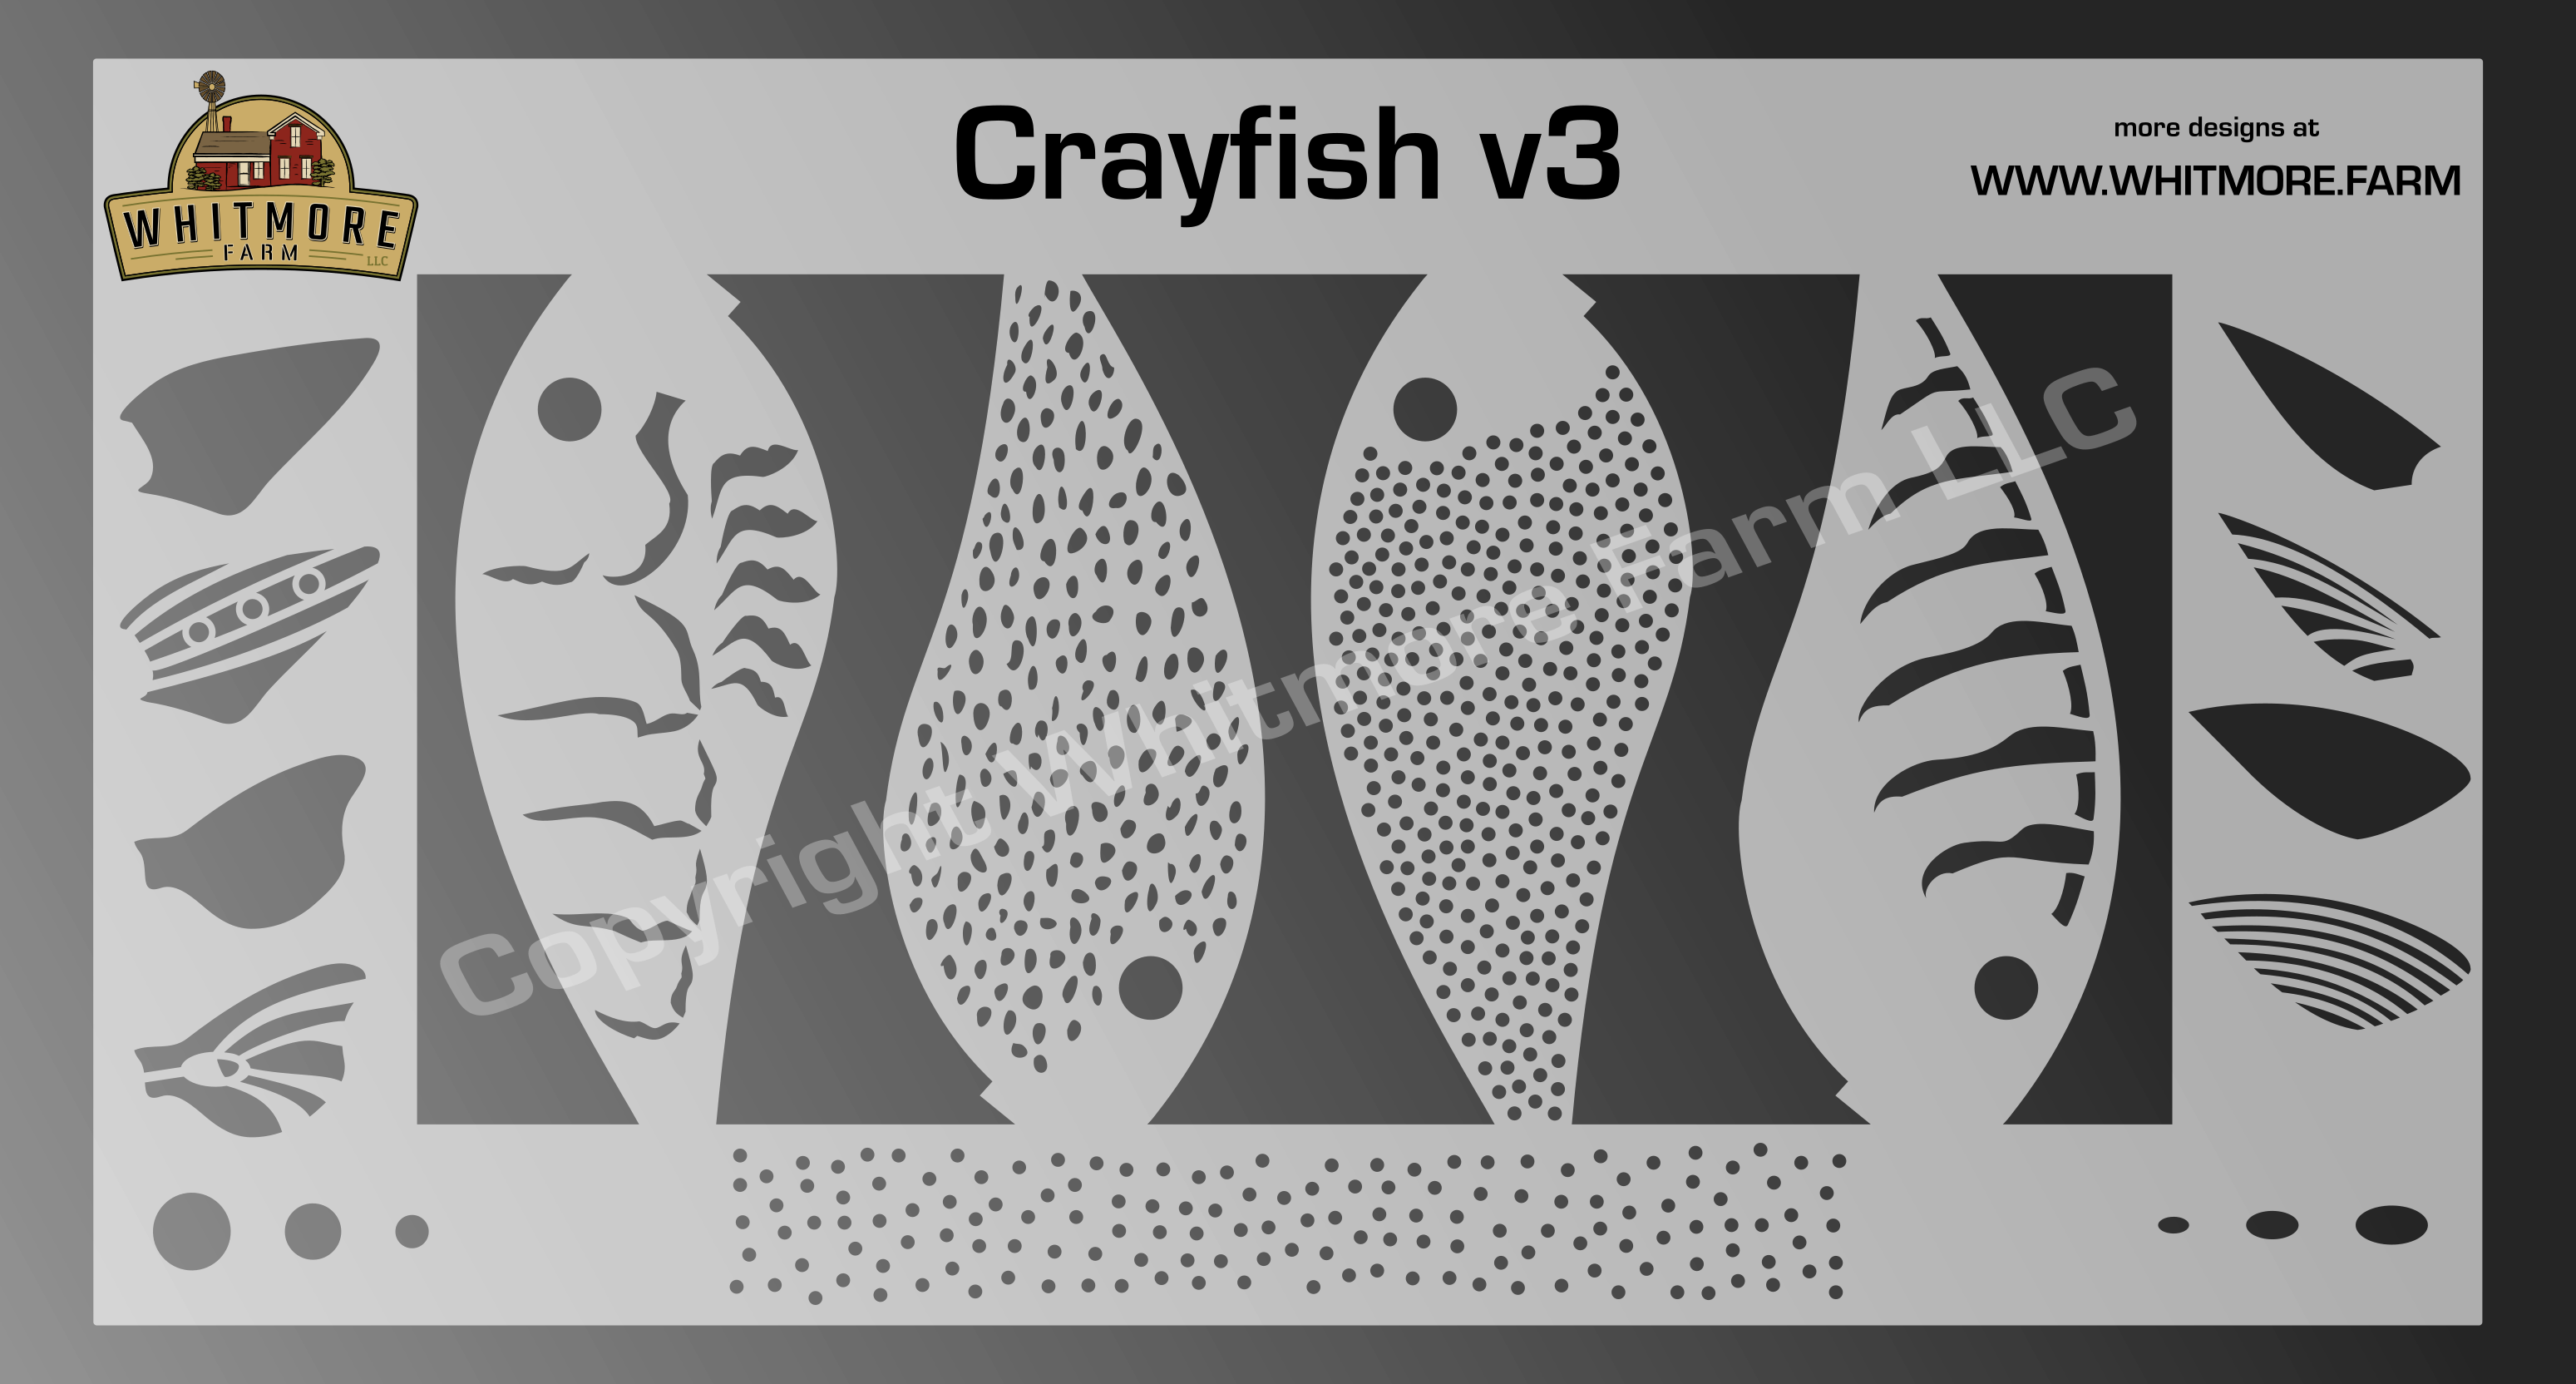 Buy 4 Fishing Lure Stencils Various Patterns Online in India 